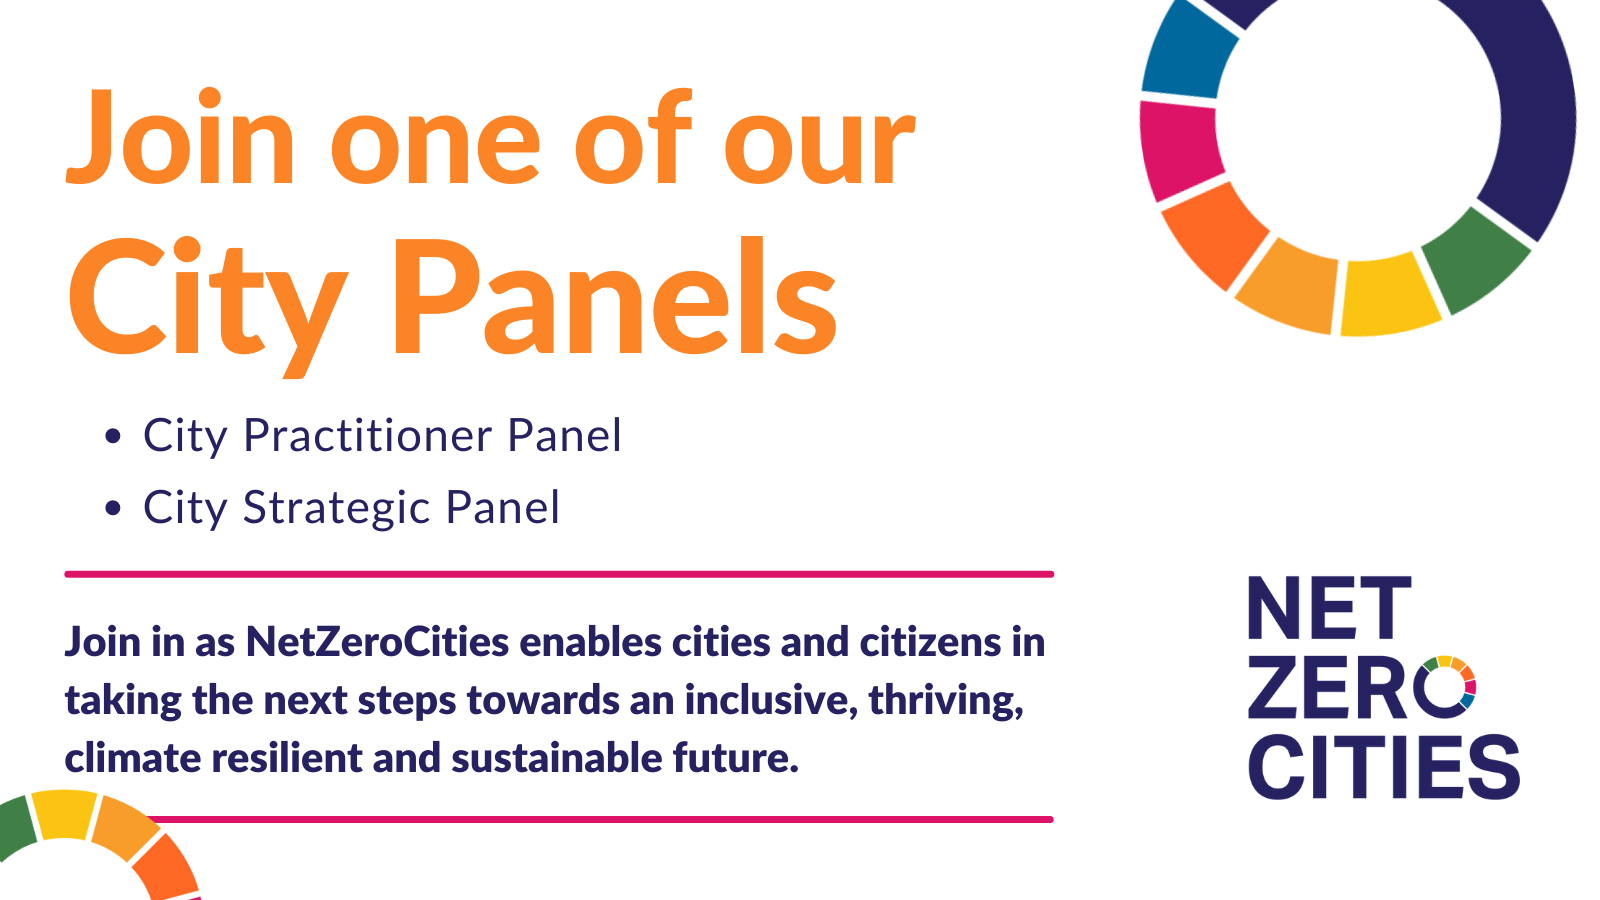 NZC is launching two City Panels ! Apply before 4 February 2022